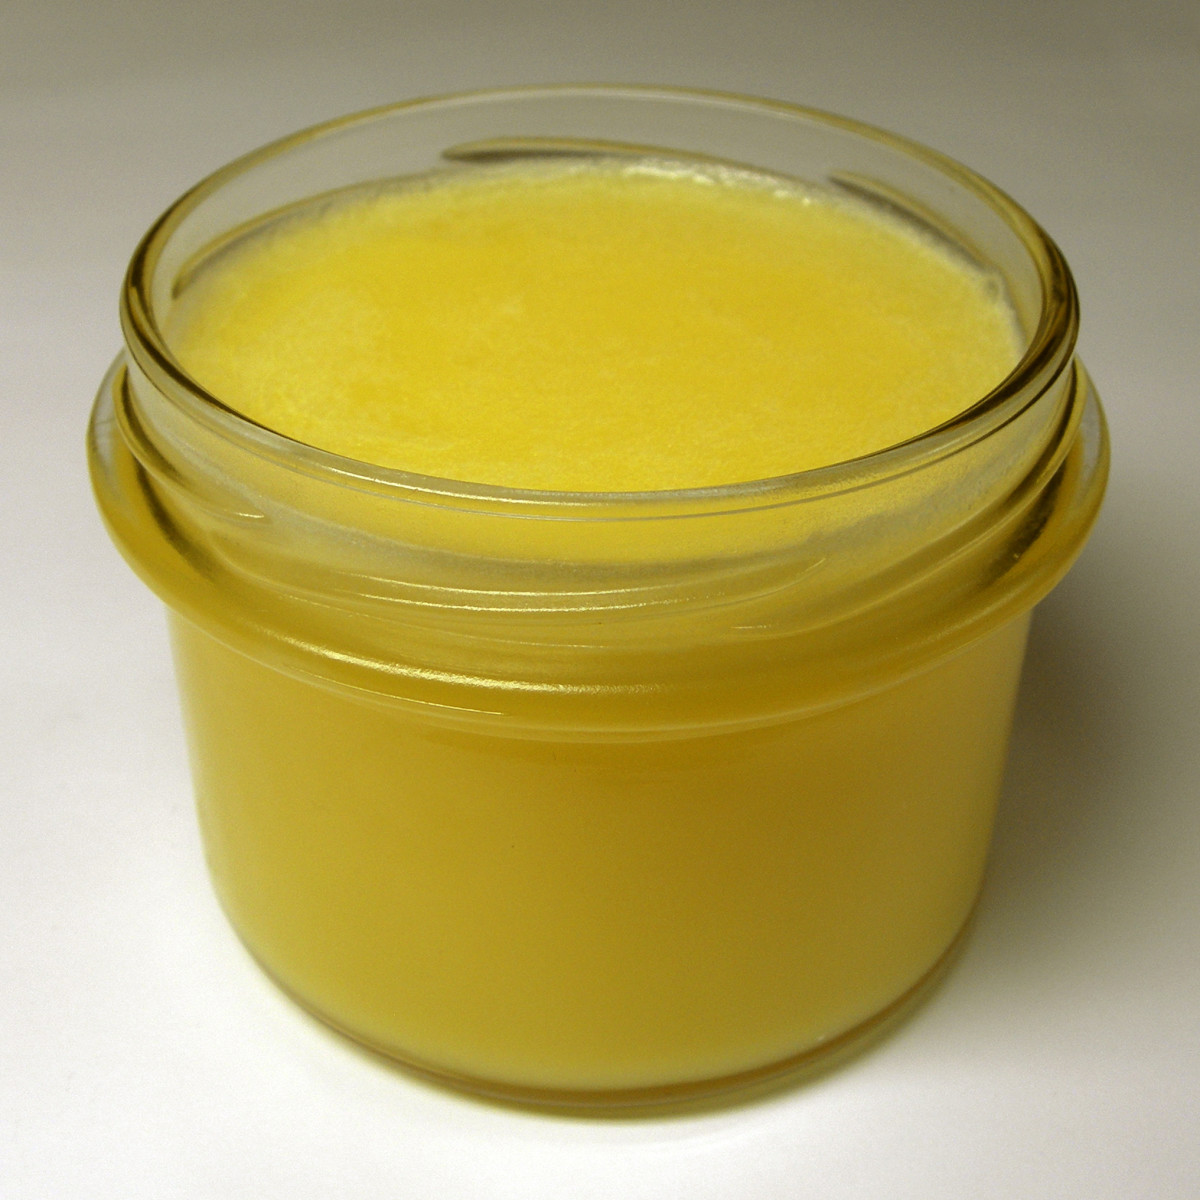 Fresh Ghee (clarified butter) at room temperature and solidified.